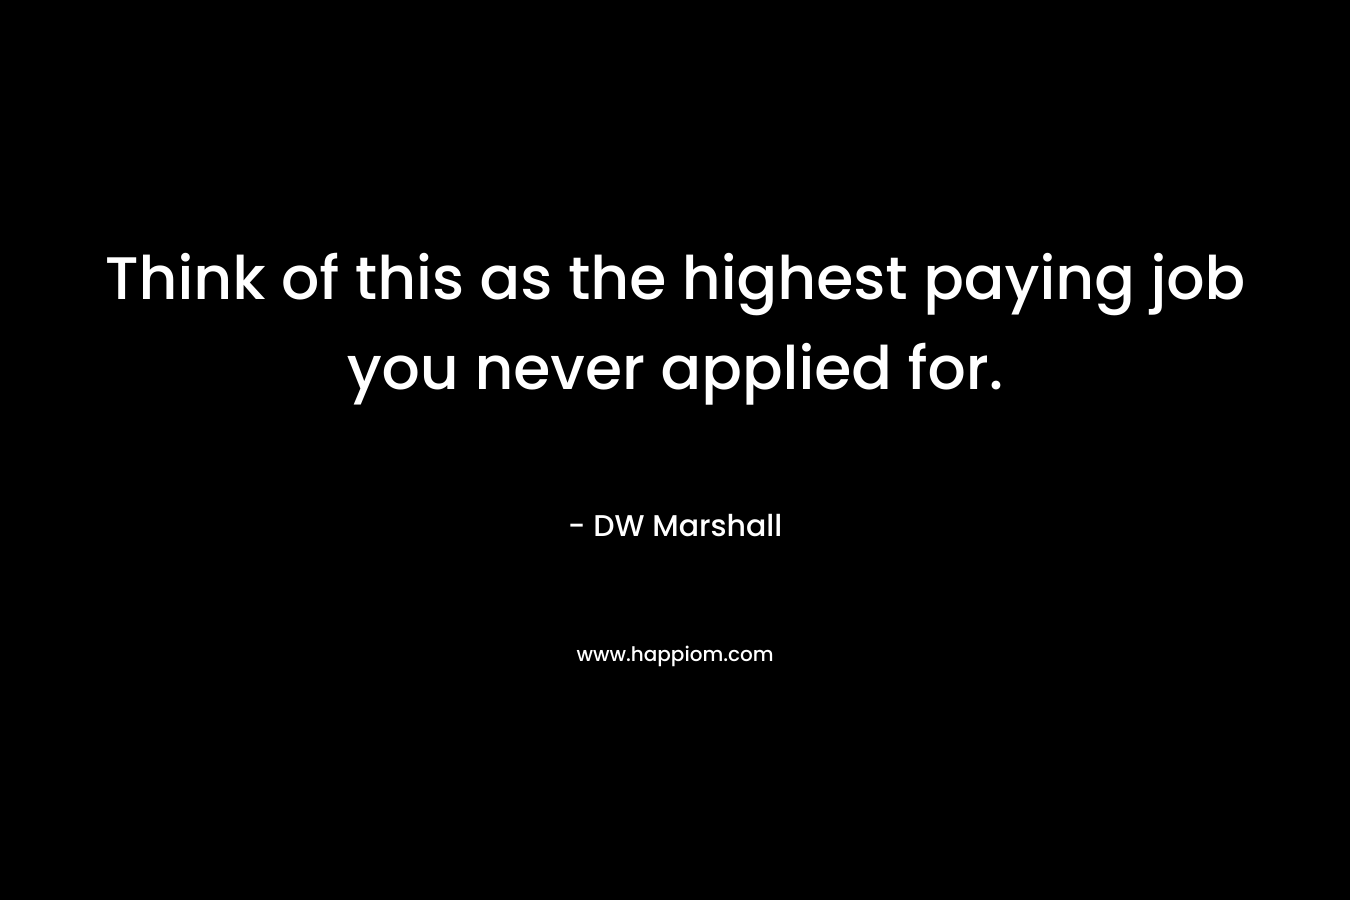 Think of this as the highest paying job you never applied for. – DW Marshall